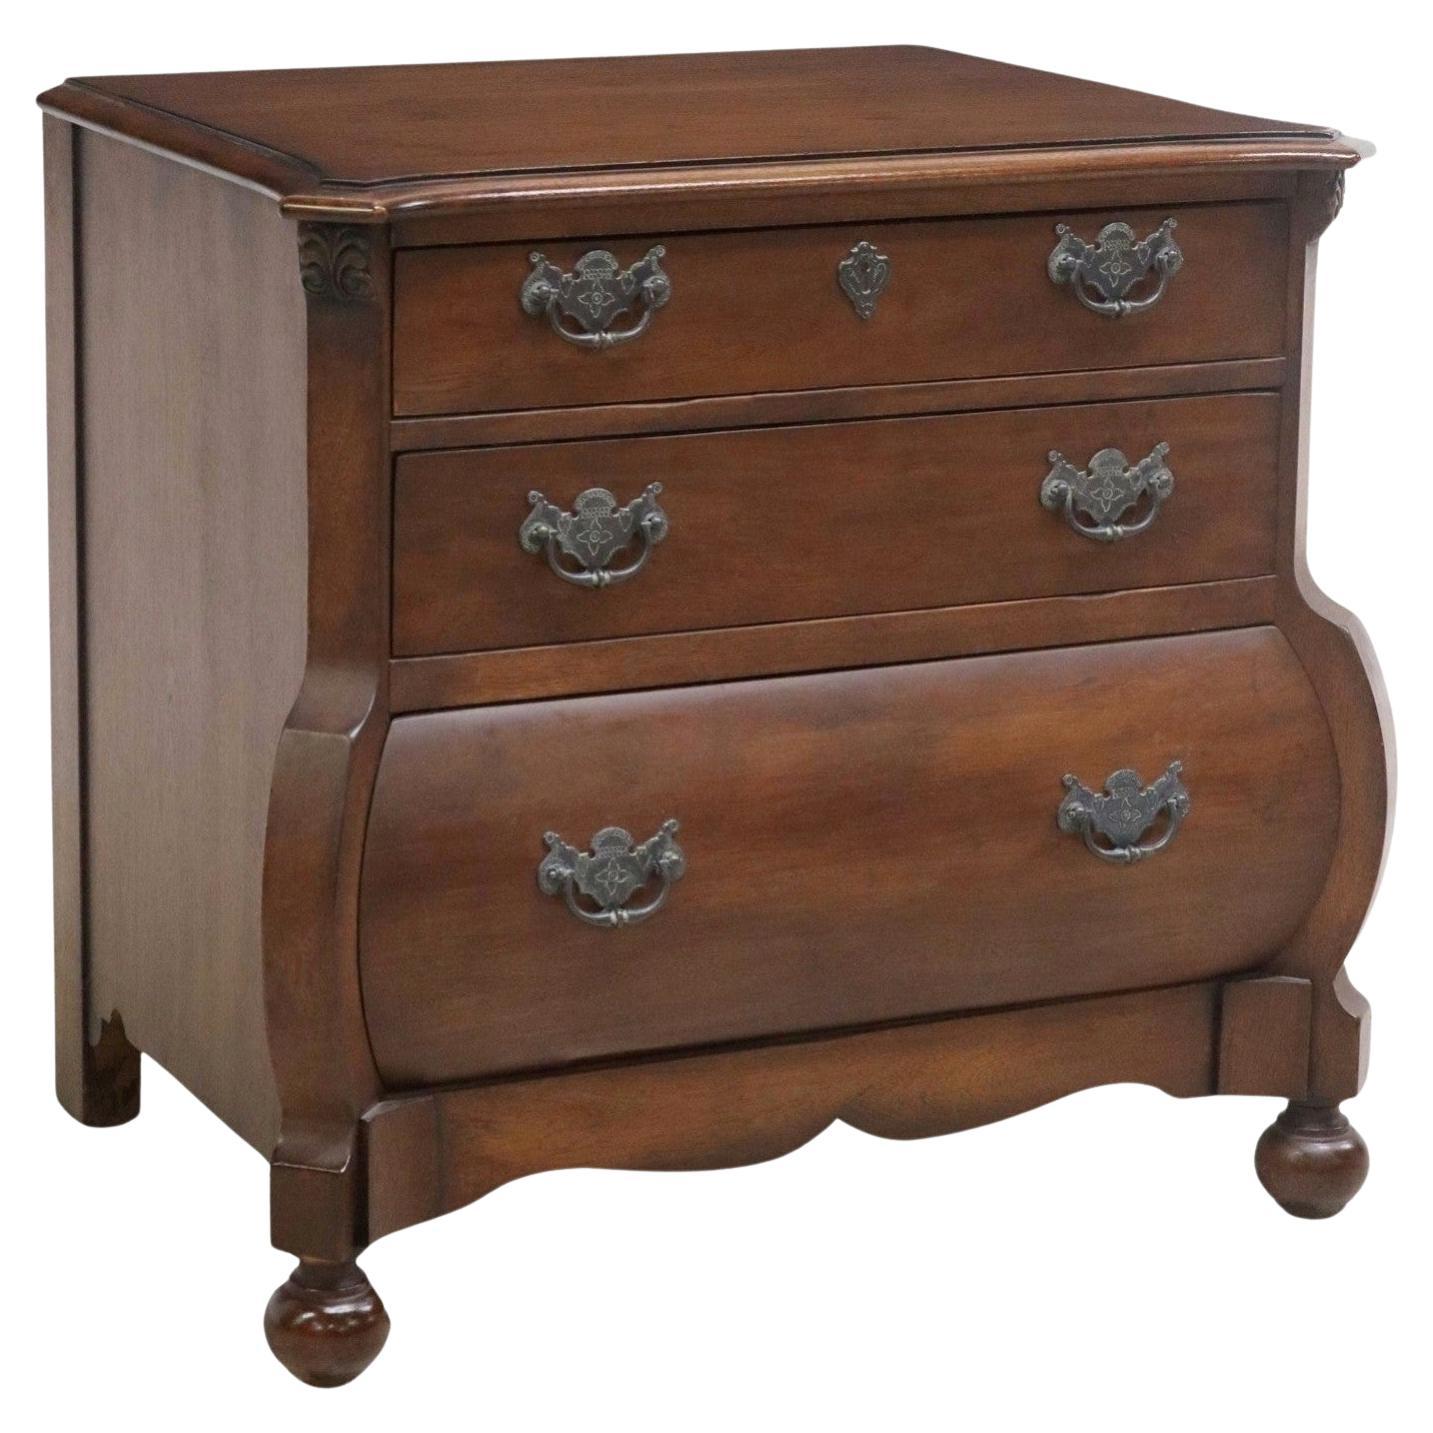 A vintage Ralph Lauren mahogany bombe chest of drawers bedside cabinet nightstand or end table. 

High quality craftsmanship and solid wood construction, exceptionally executed in antique 18th century Dutch Baroque style, having a shaped top with